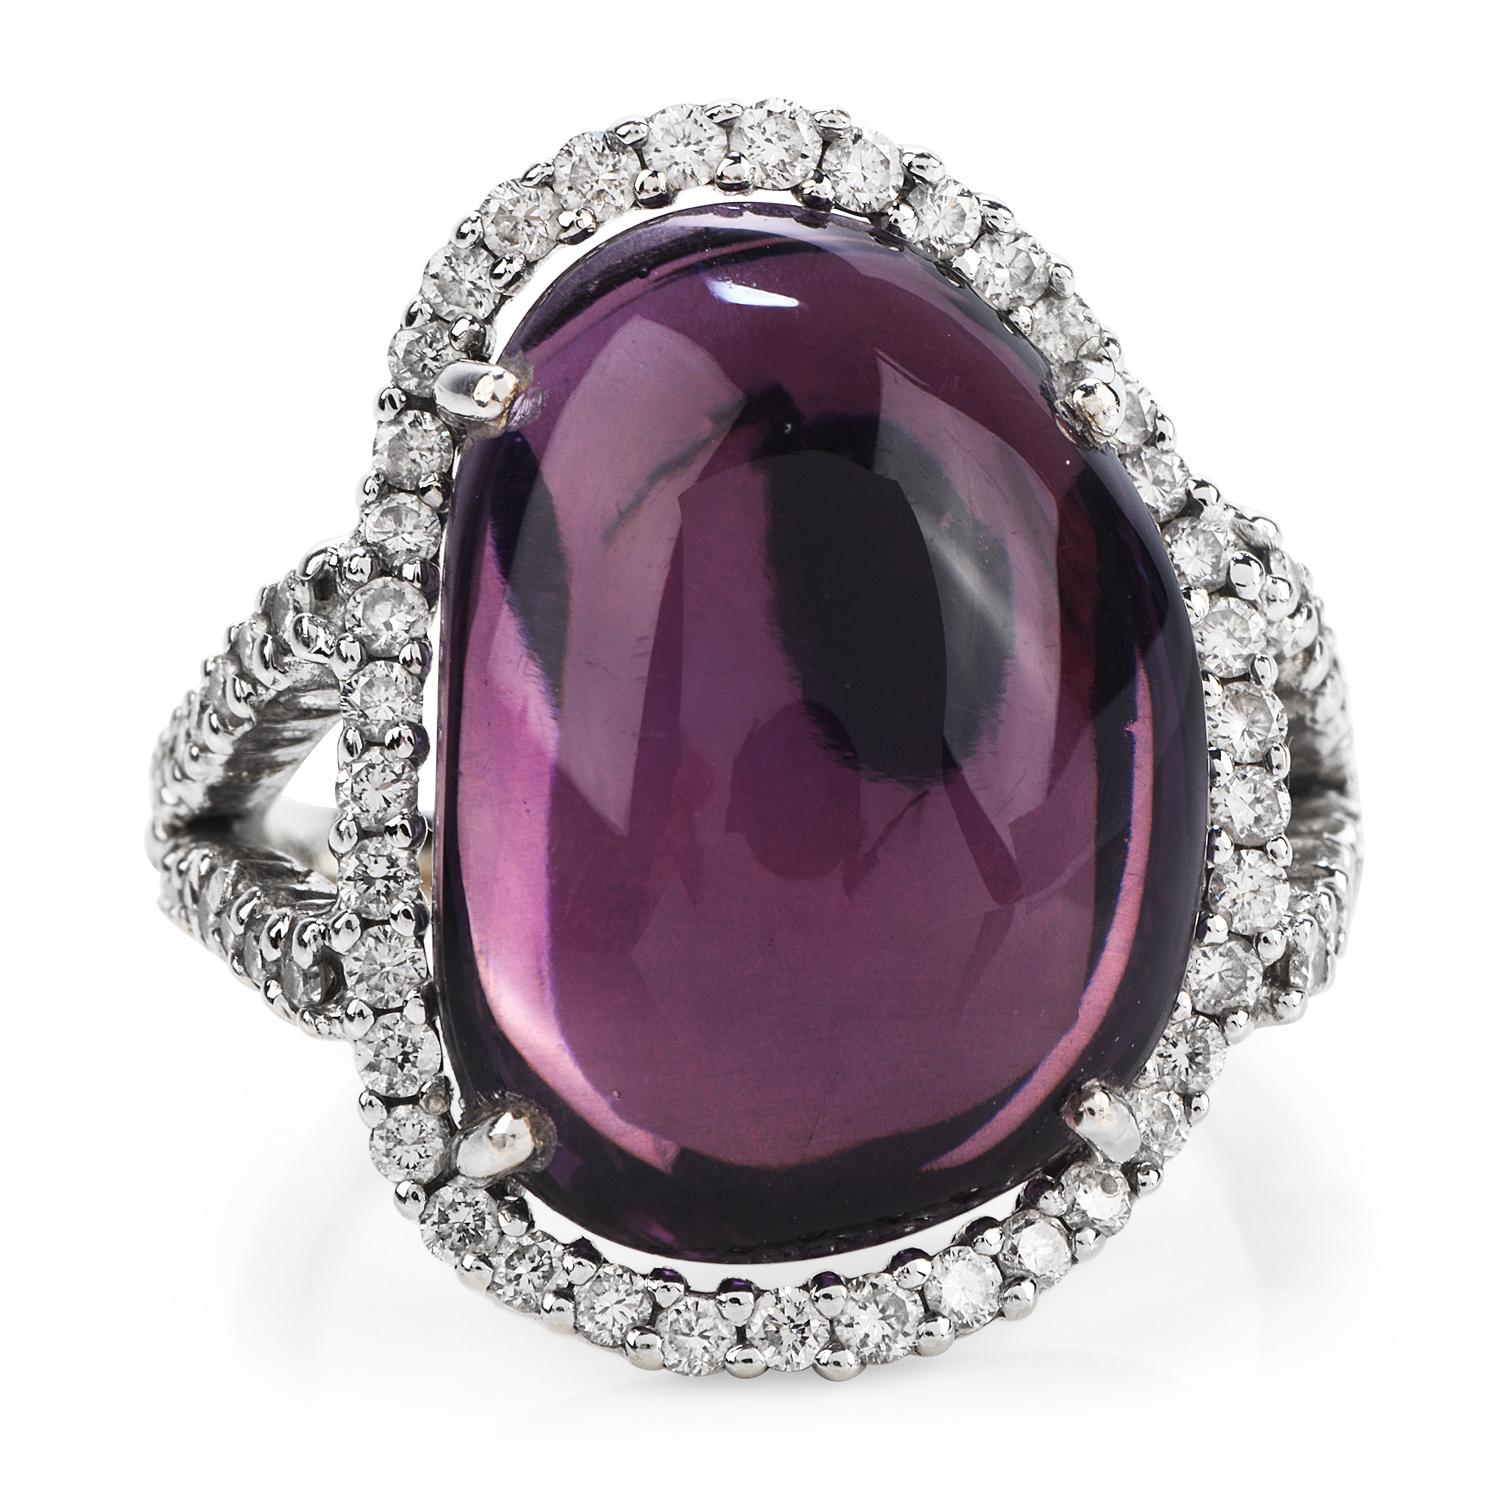 This H. Stern Diamond & Amethyst Cocktail Ring Crafted in solid 18K White & Yellow Gold. The center is adorned by an oval shape, cabochon cut, prong-set, Amethyst weighing 12.13 carats.

The halo design has (70) round cut, pave set, genuine diamonds